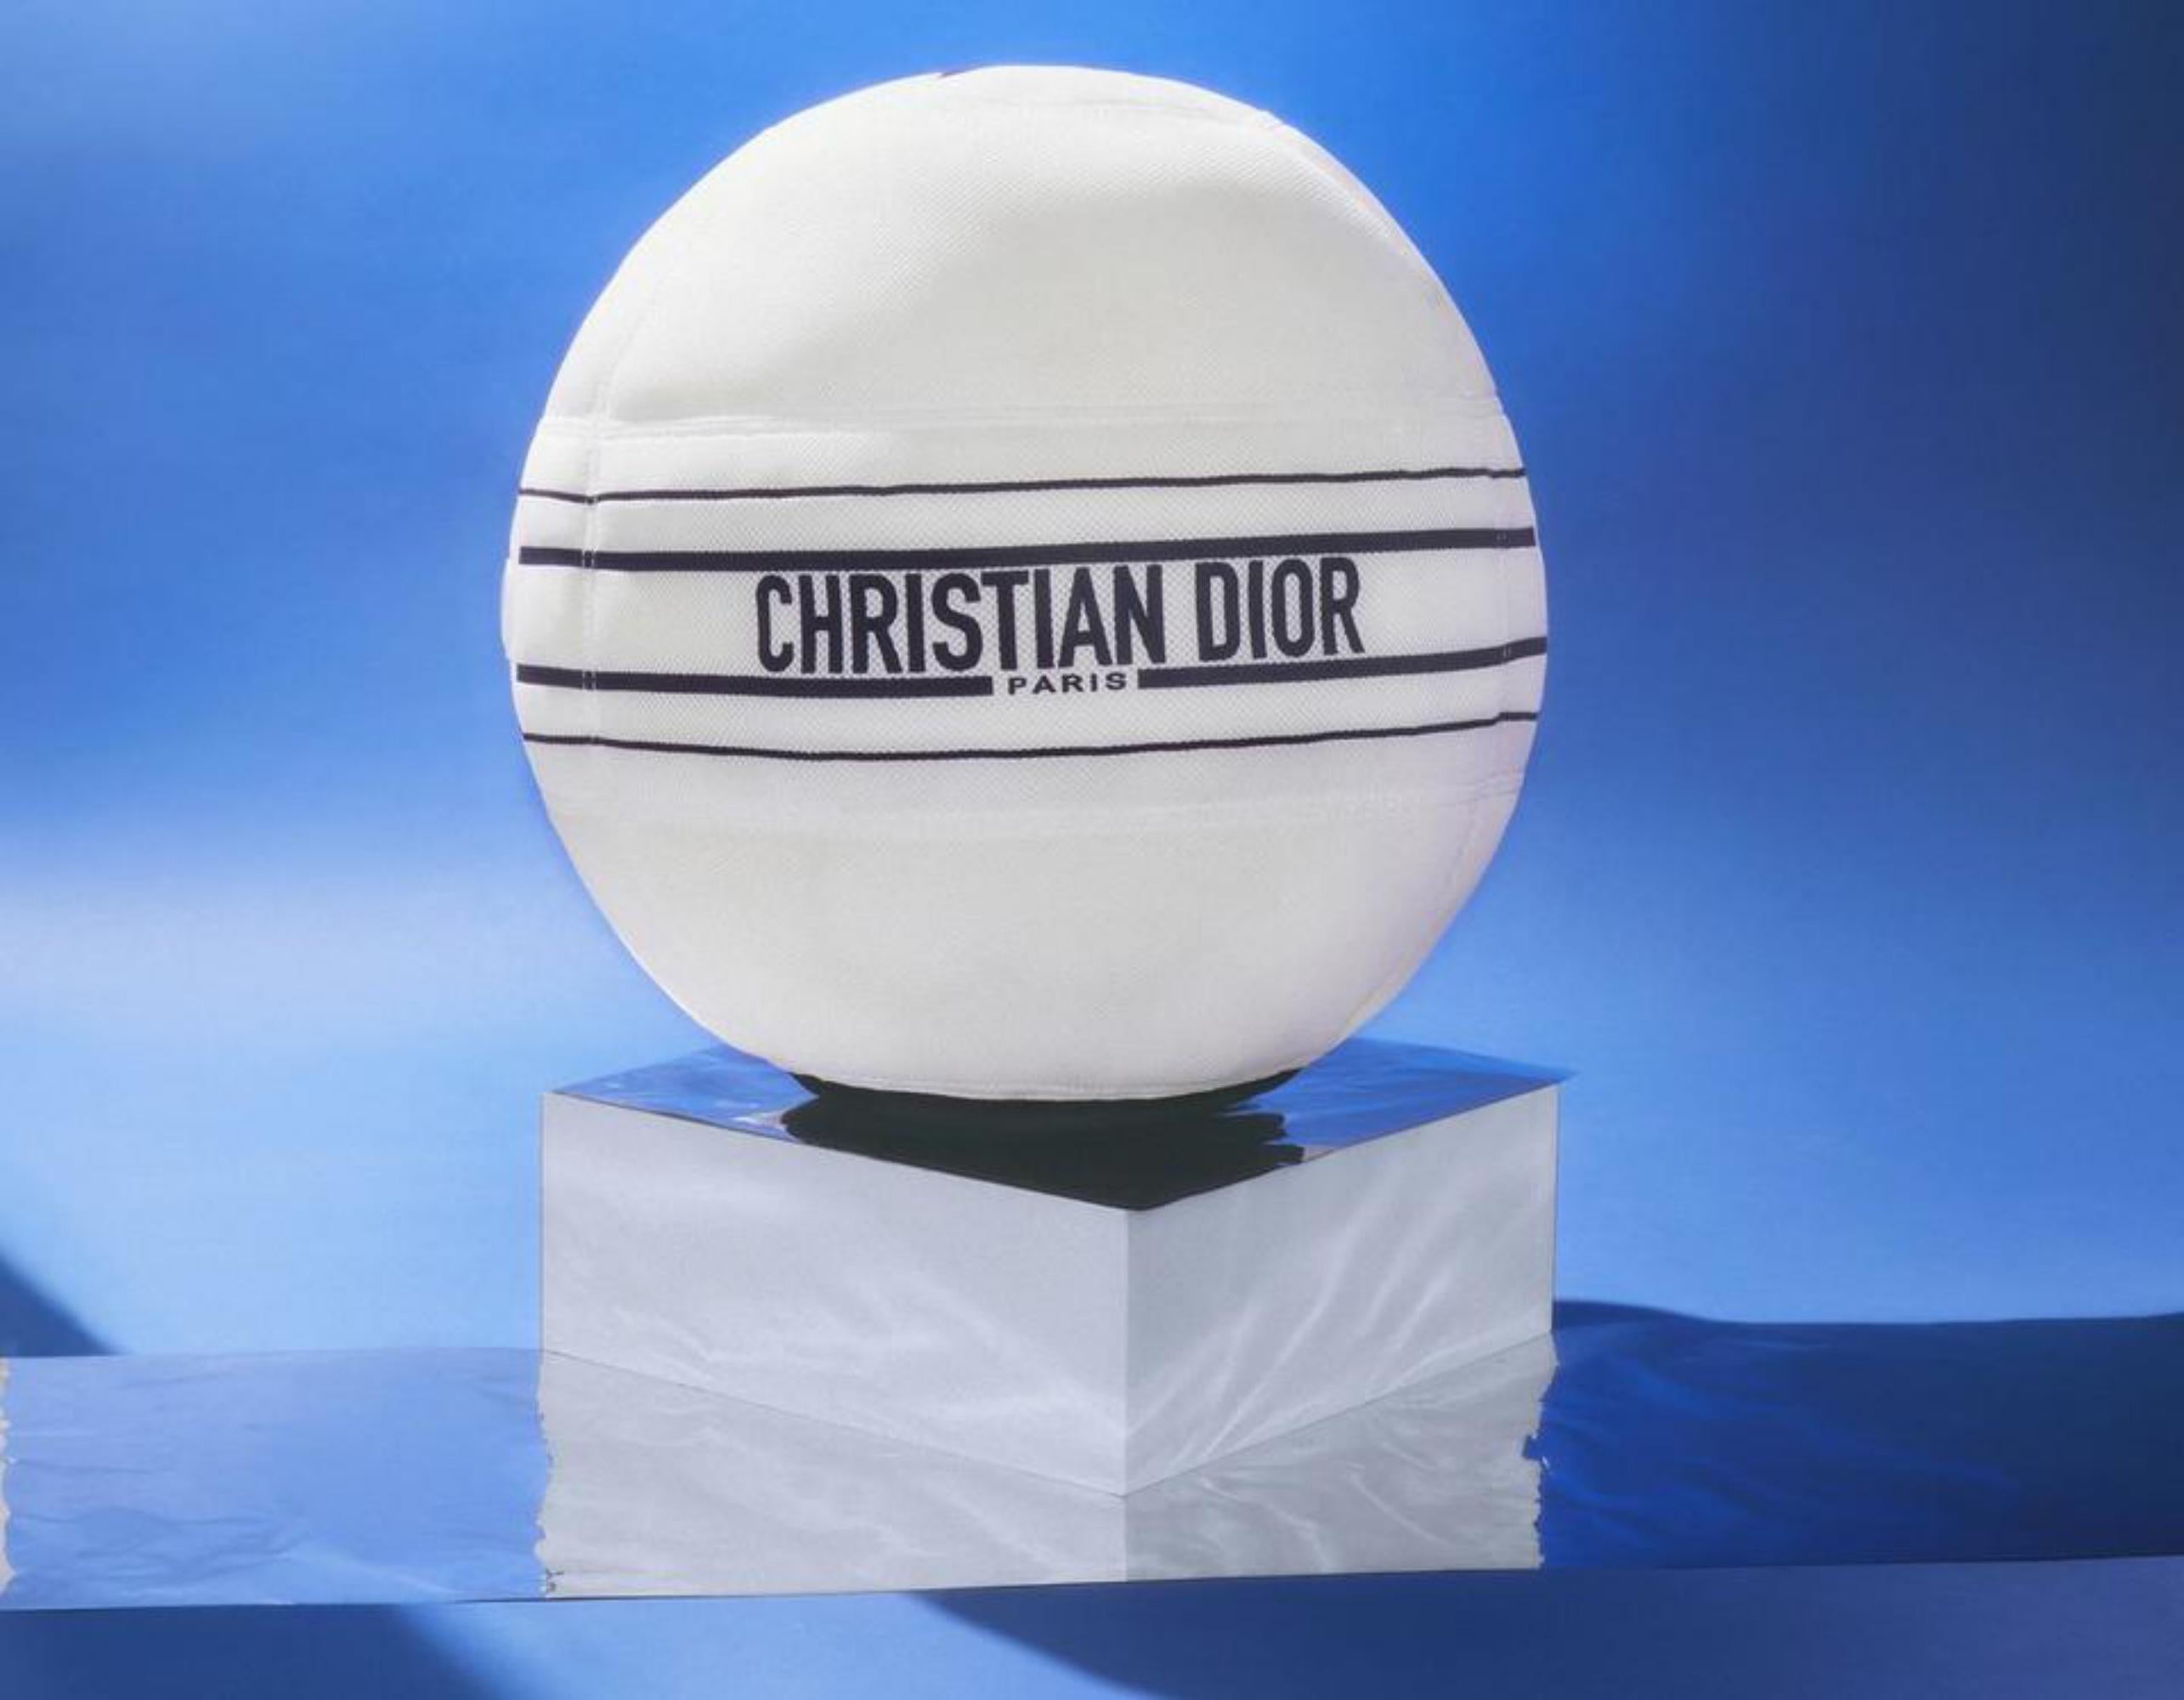 Dior Limited Edition White Logo Technogym Gym Ball for Dior Yoga 1DIOR127
BRAND NEW
(10/10 or N)

SIZE & FIT
Diameter: 55 cm / 21.5 inches
Weight limit: 140 kg / 308.5 pounds

Combining wellbeing and elegance, TECHNOGYM BALL FOR DIOR is offered in a